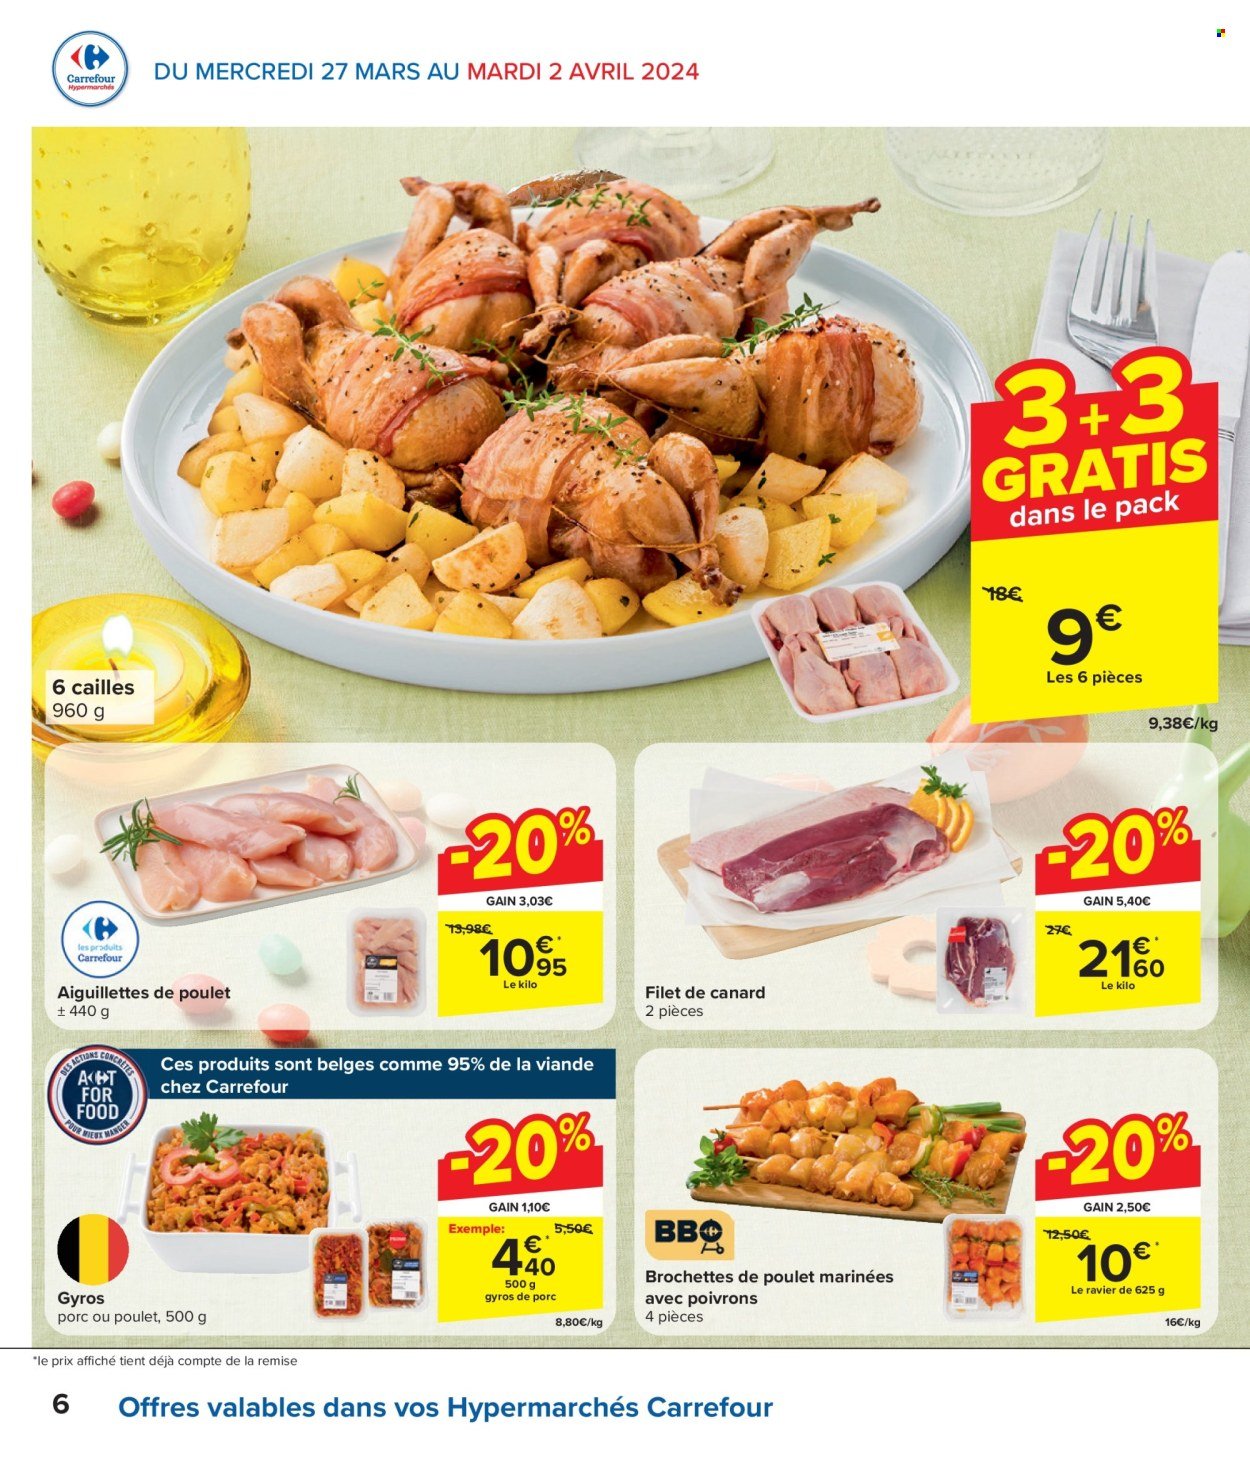 Catalogue Carrefour hypermarkt - 27.3.2024 - 8.4.2024. Page 6.